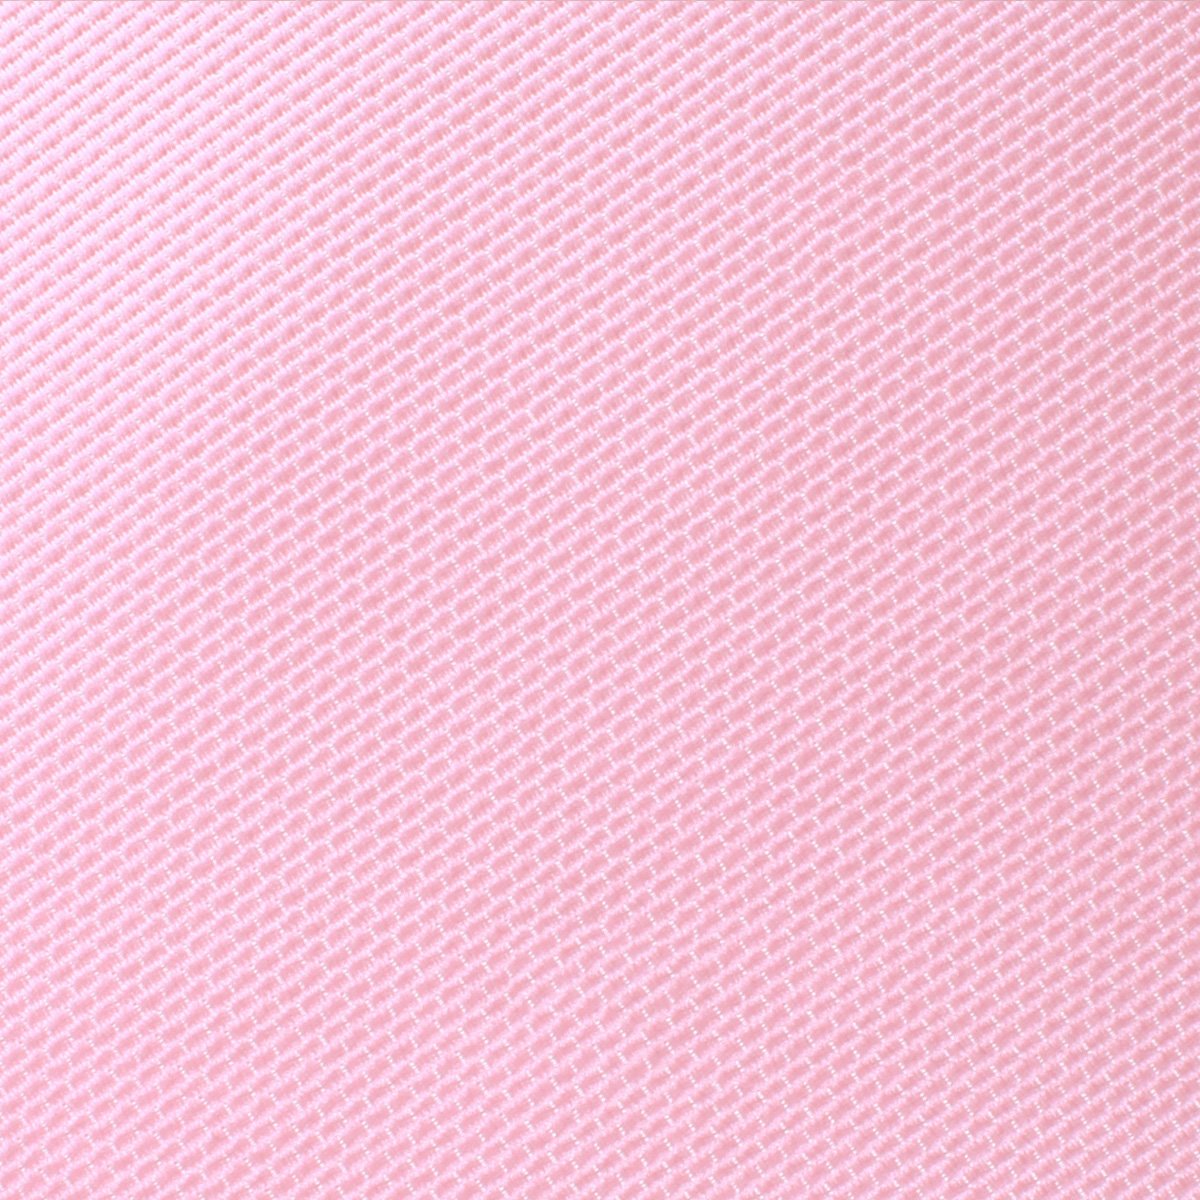 Tickled Pink Weave Pocket Square Fabric